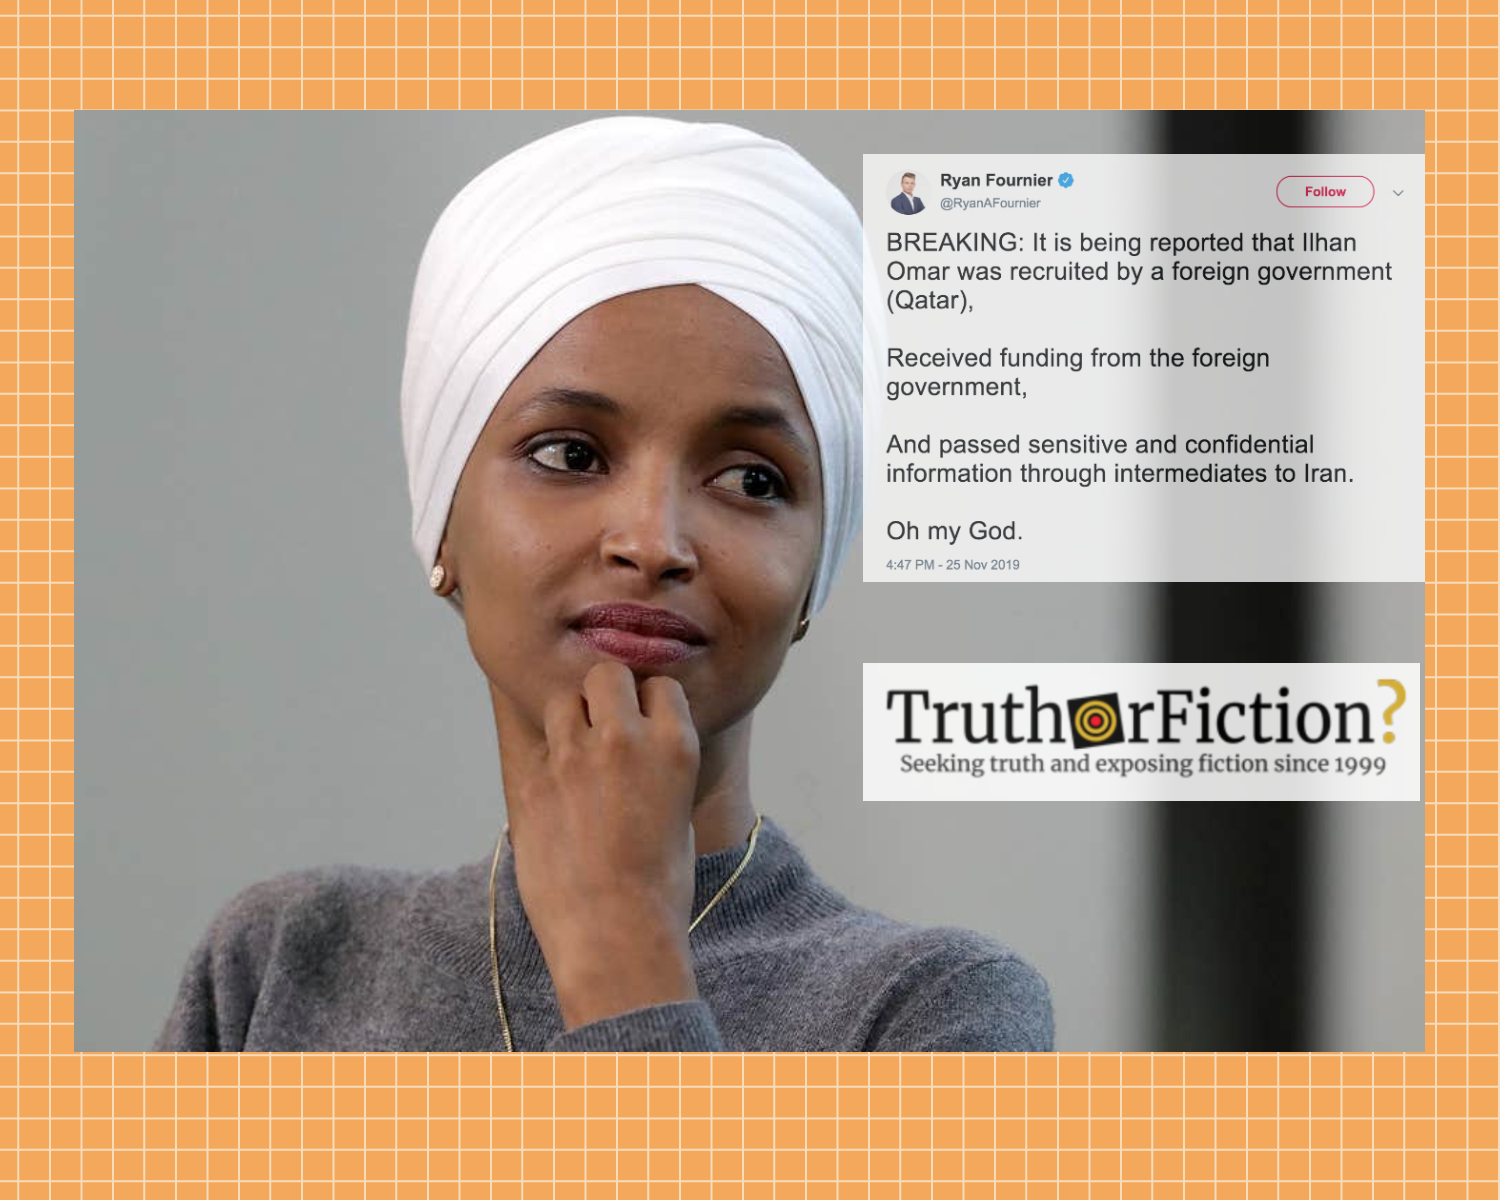 Was Rep. Ilhan Omar ‘Recruited by a Foreign Government’?